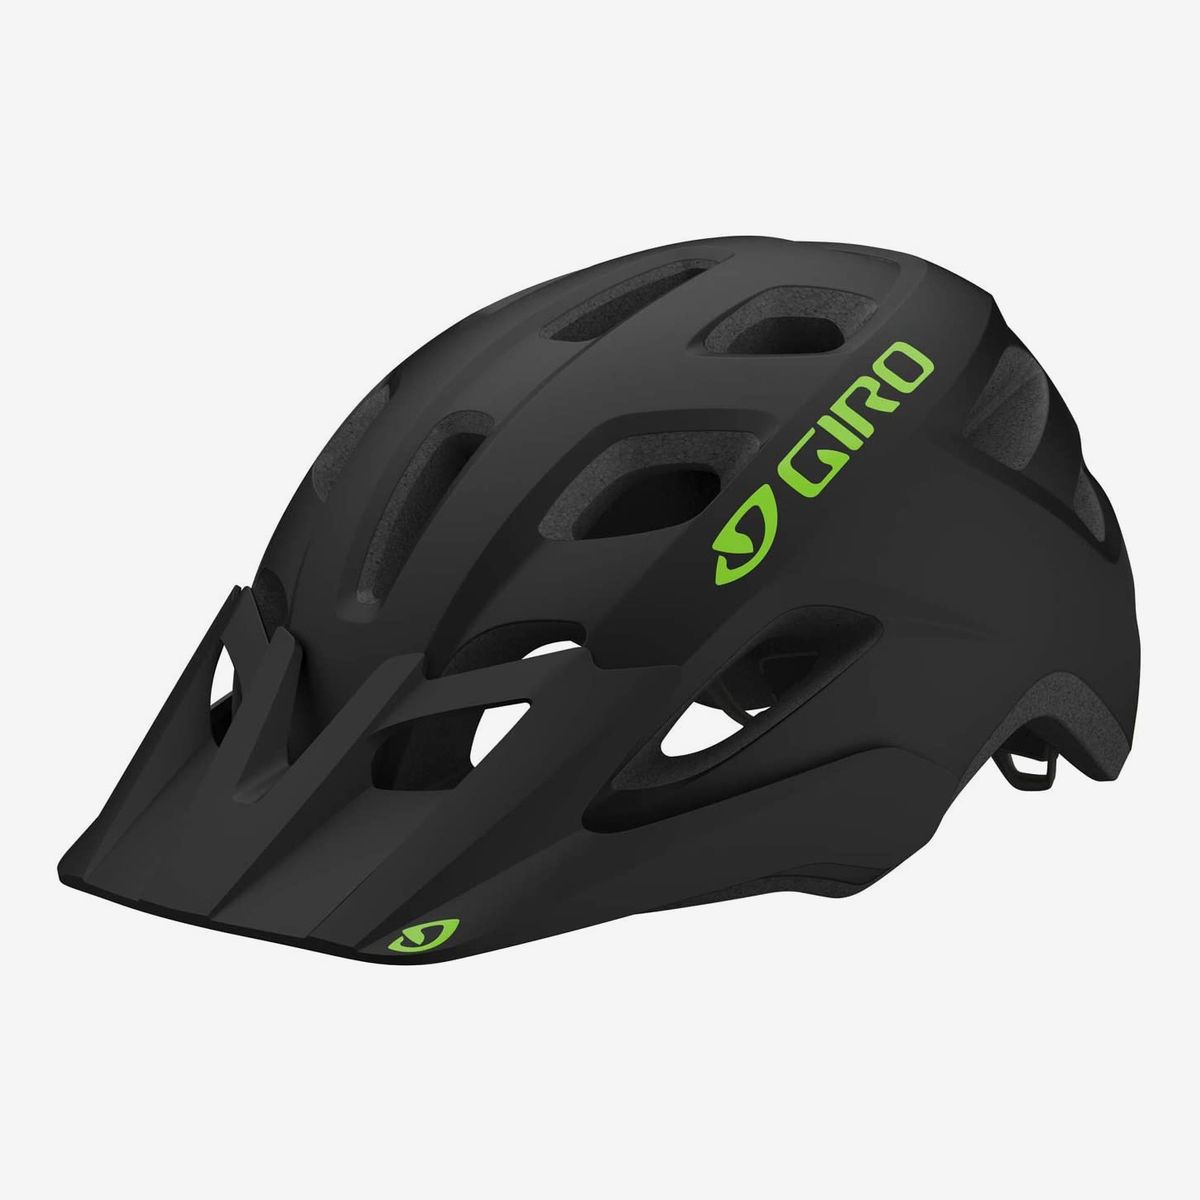 helmet for one year old